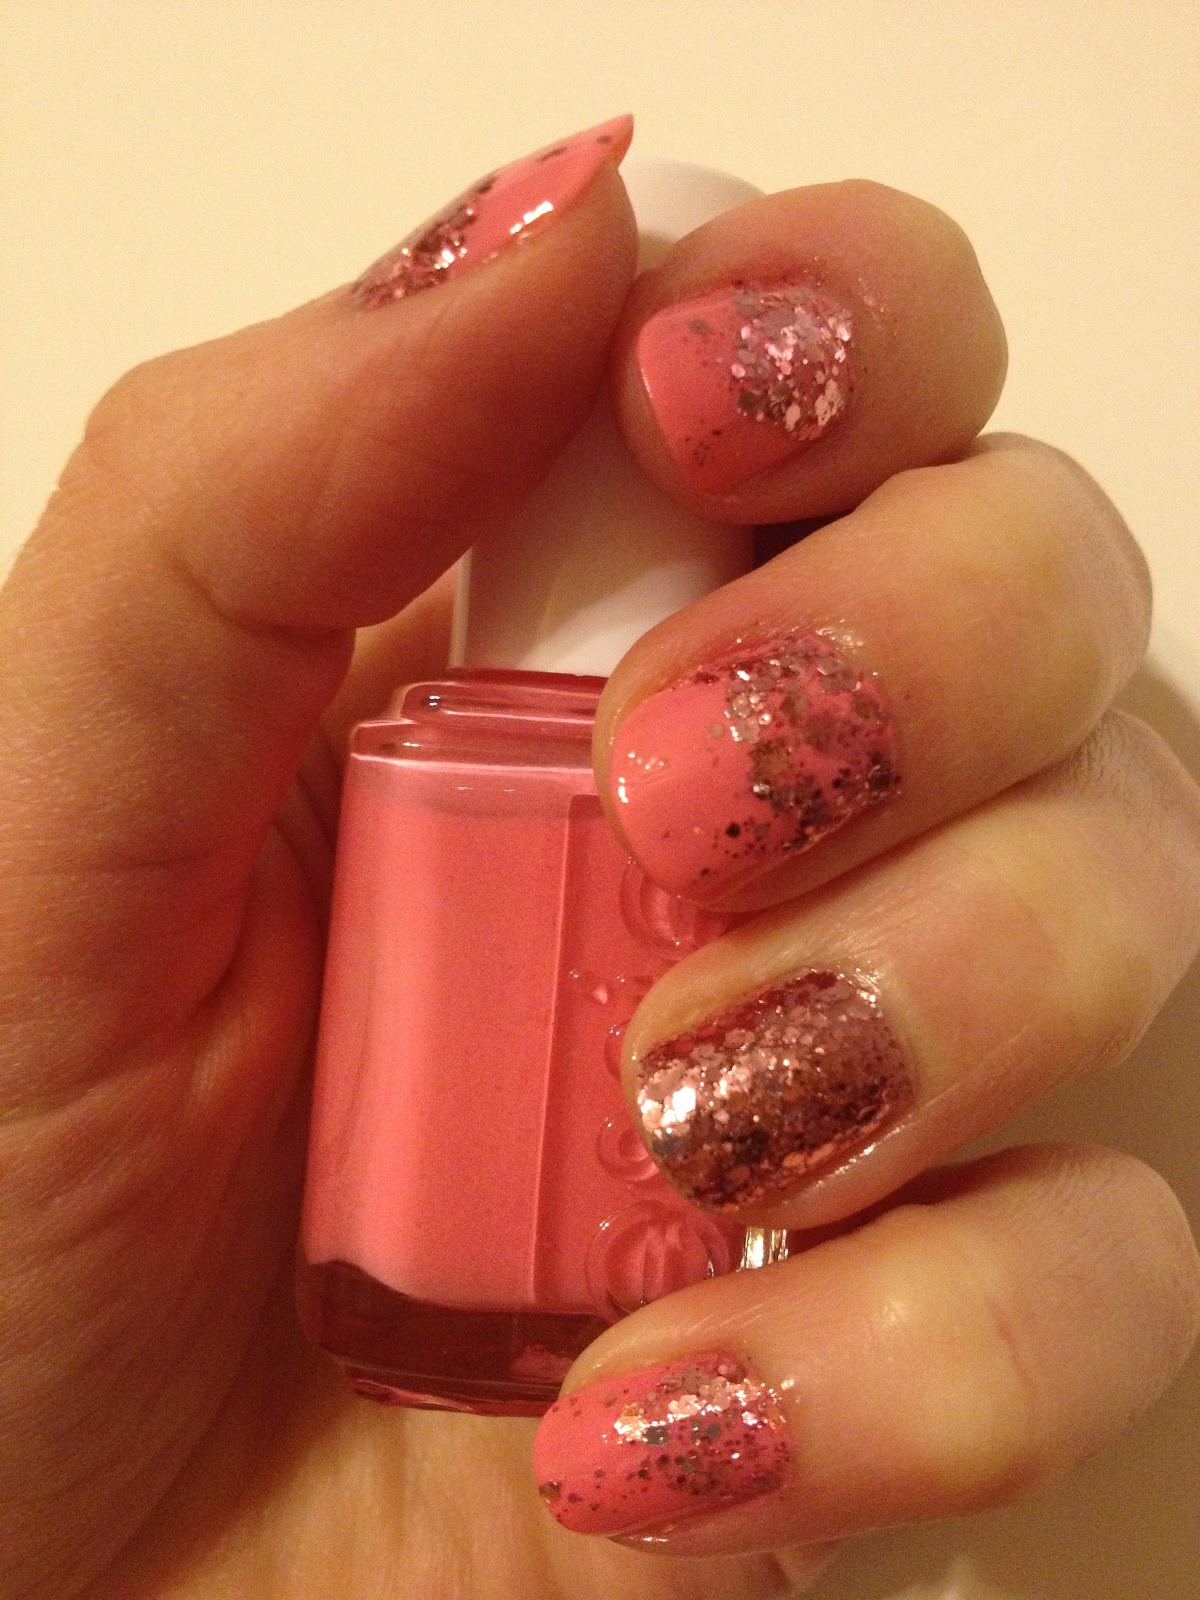 The Essie A Cut Above sparkle hangs on like no other nail polish